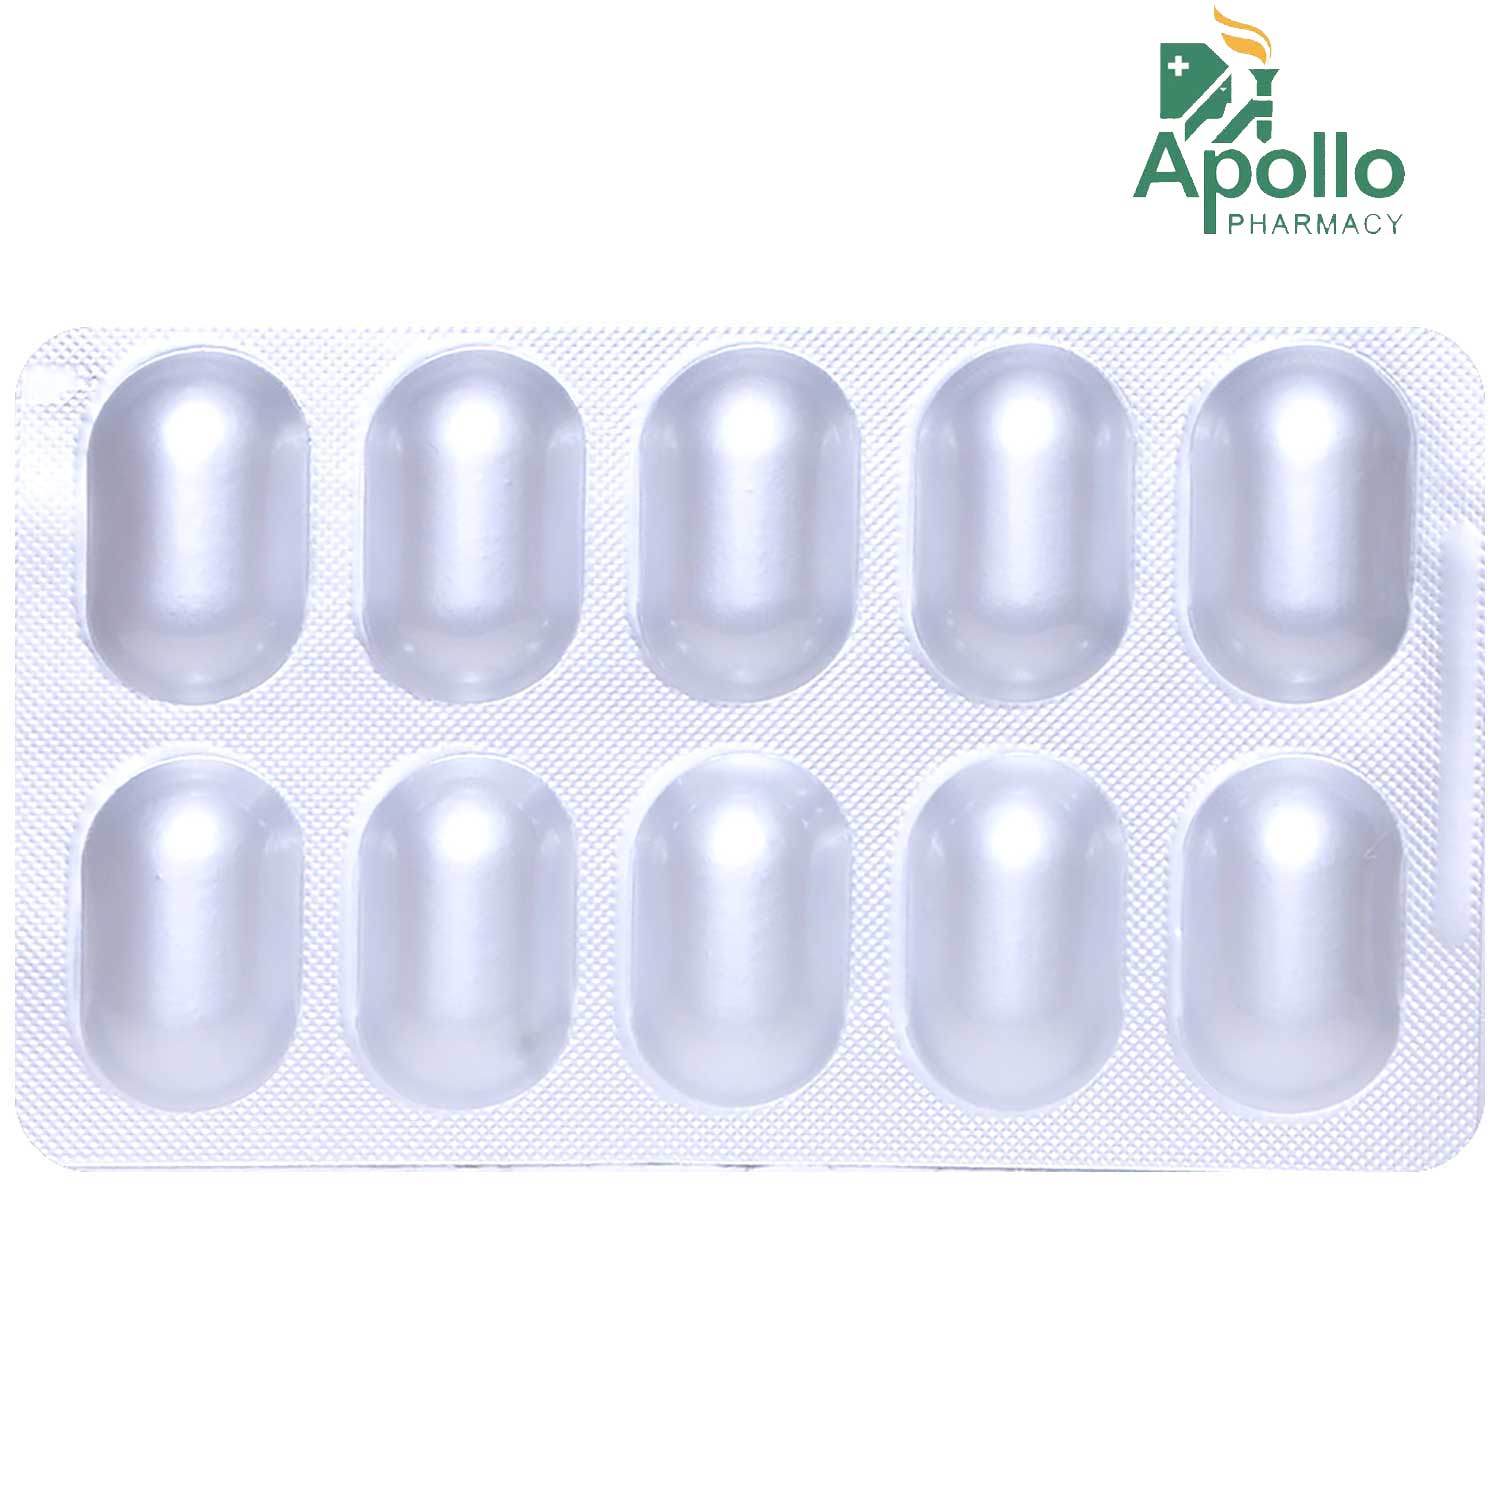 Macvestin Tablet 10's Price, Uses, Side Effects, Composition - Apollo ...